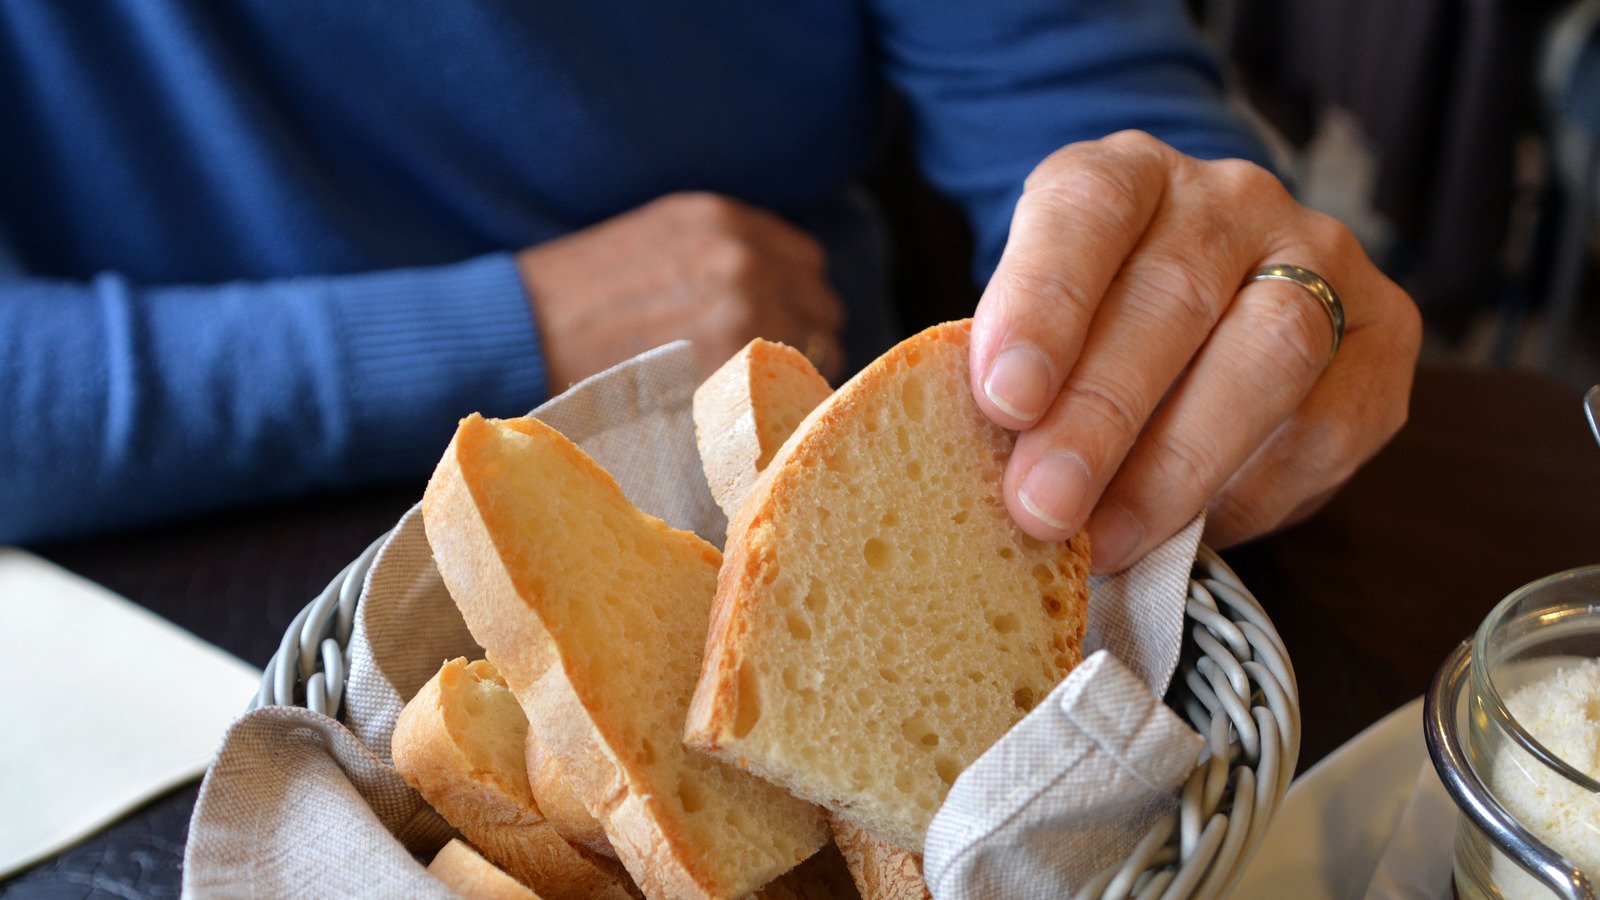 Here's What Happens When You Eat Bread On An Empty Stomach